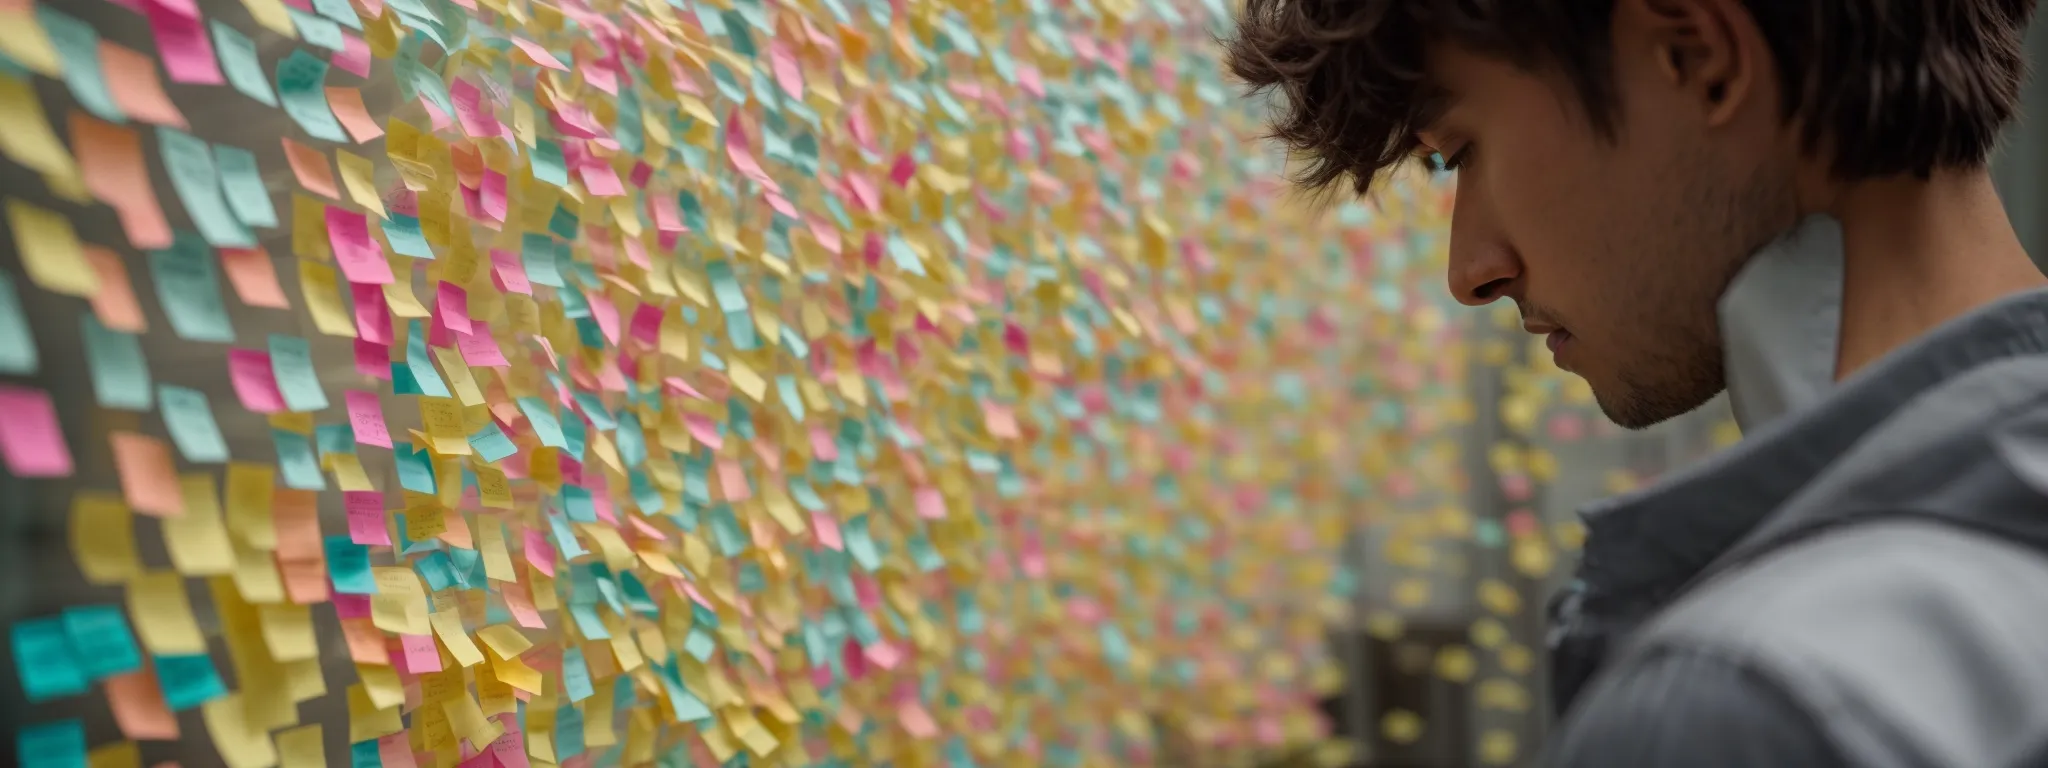 a focused individual examining a dense cluster of colorful sticky notes on a glass wall, representing various keyword ideas and strategies.